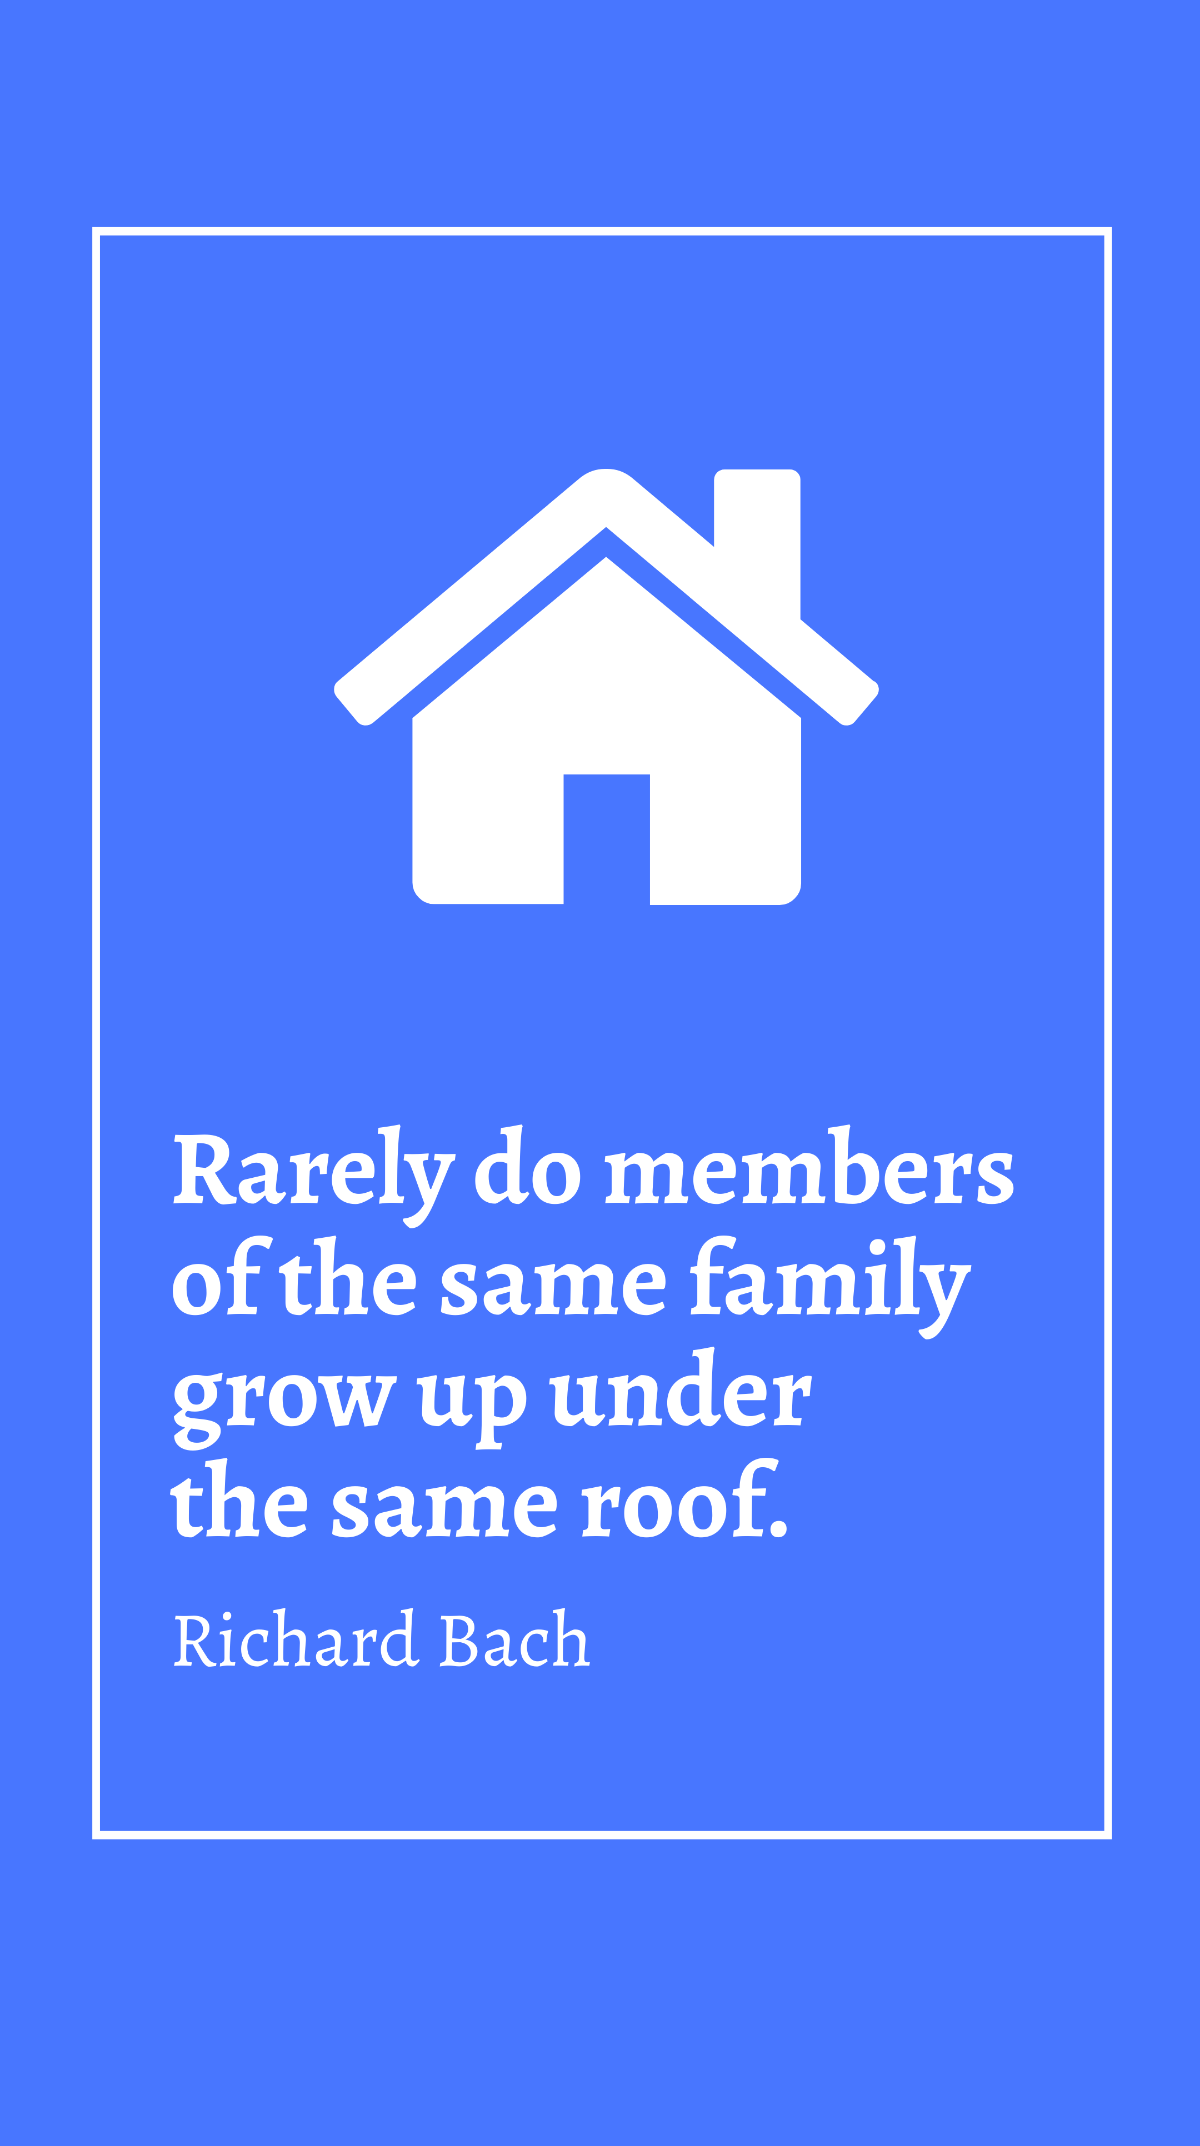 Richard Bach - Rarely do members of the same family grow up under the same roof. Template